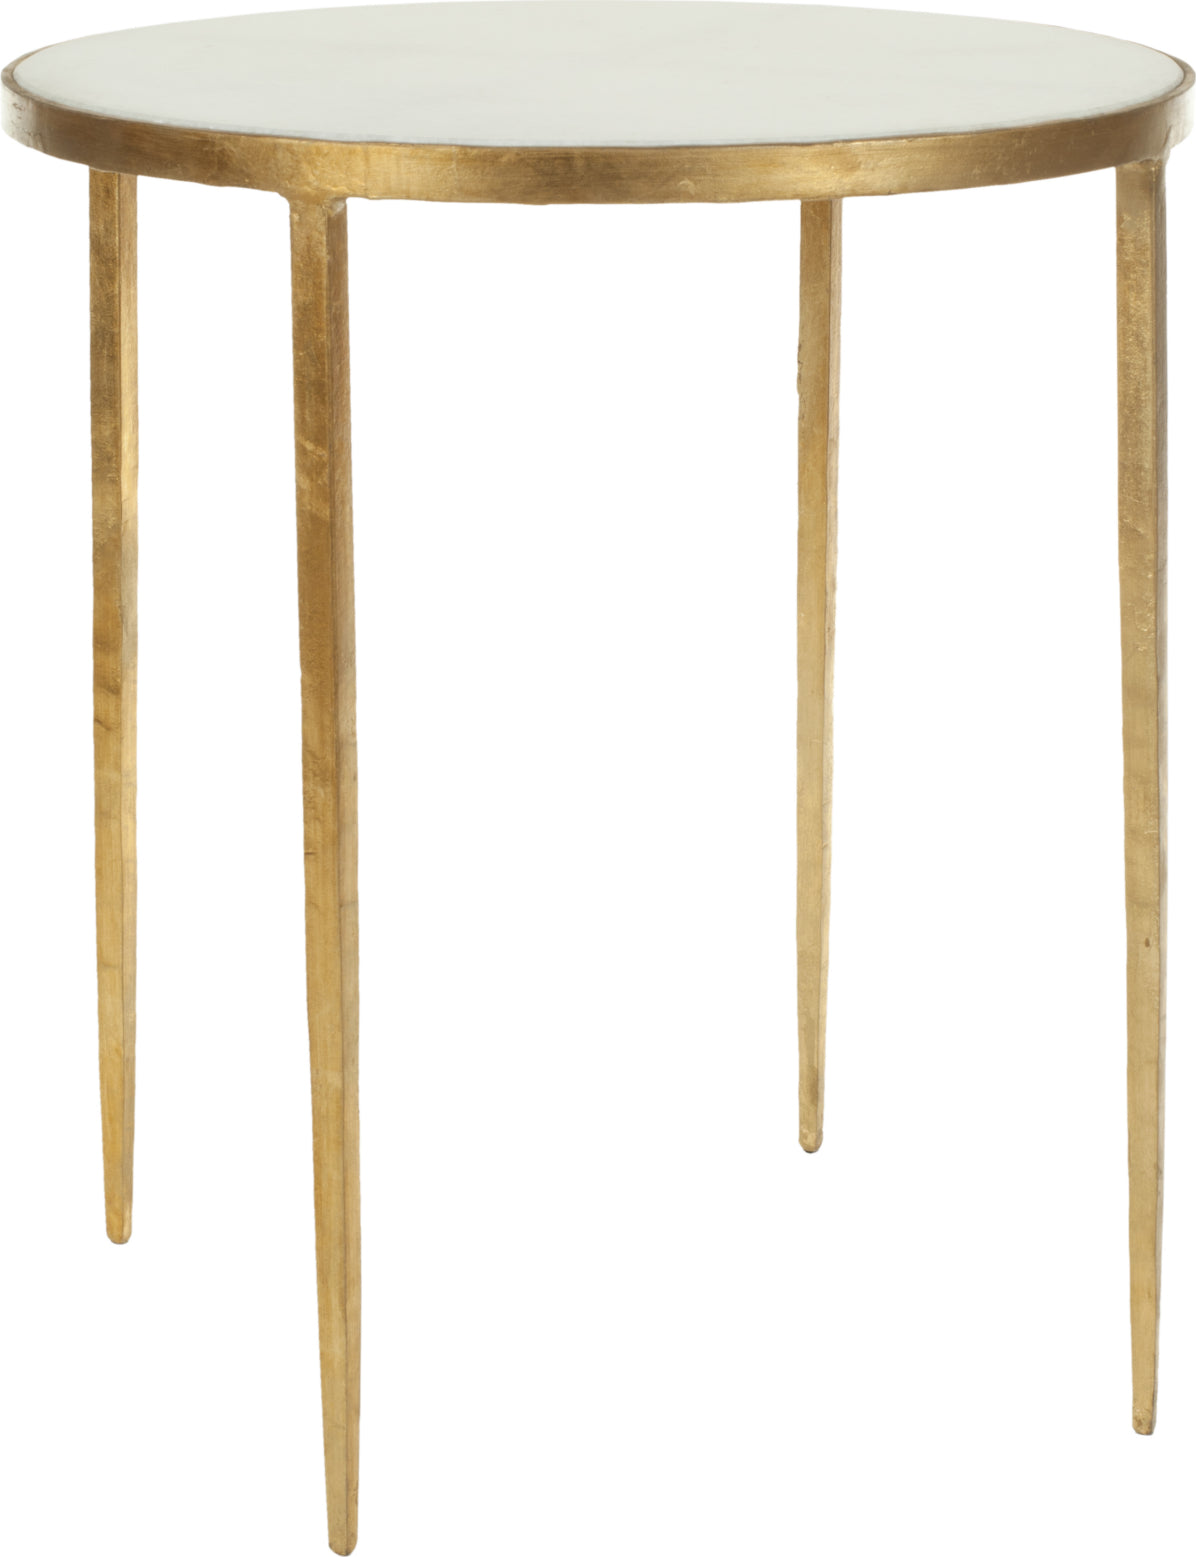 Safavieh Tracey Gold Foil Round Top Accent Table White and Furniture main image